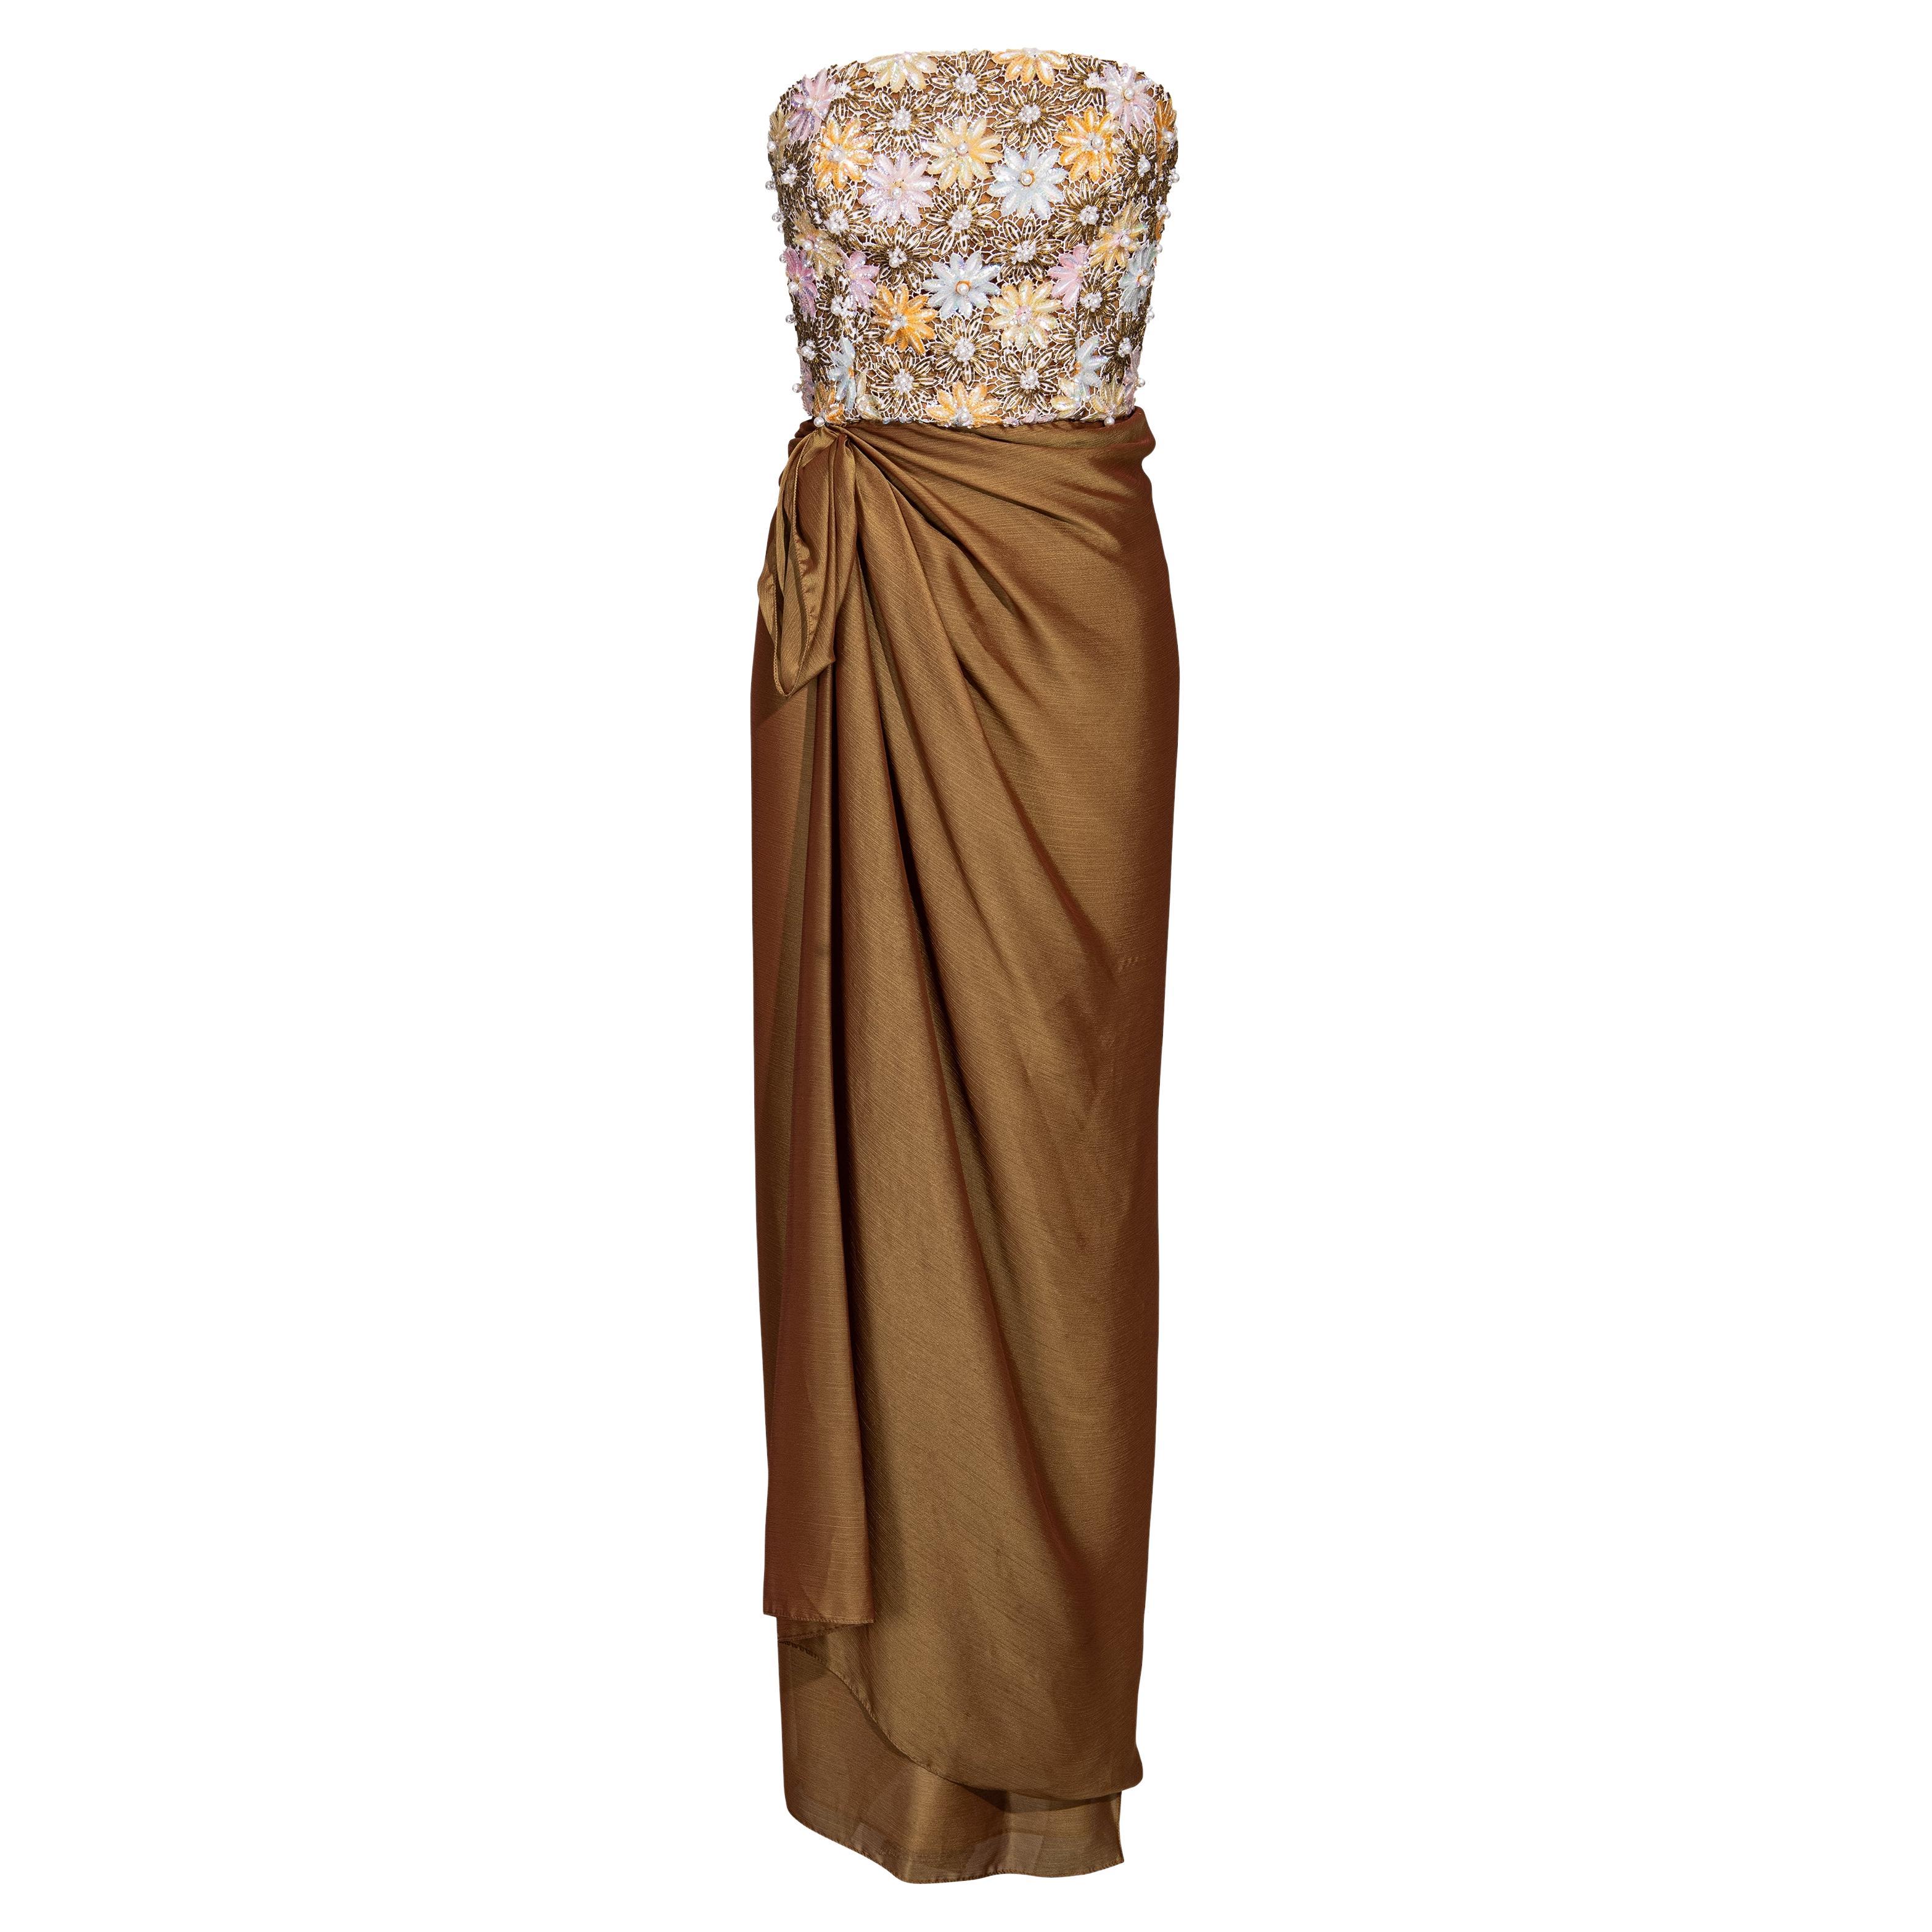 c. 1991 Nina Ricci Embellished Copper Strapless Gown with Stole